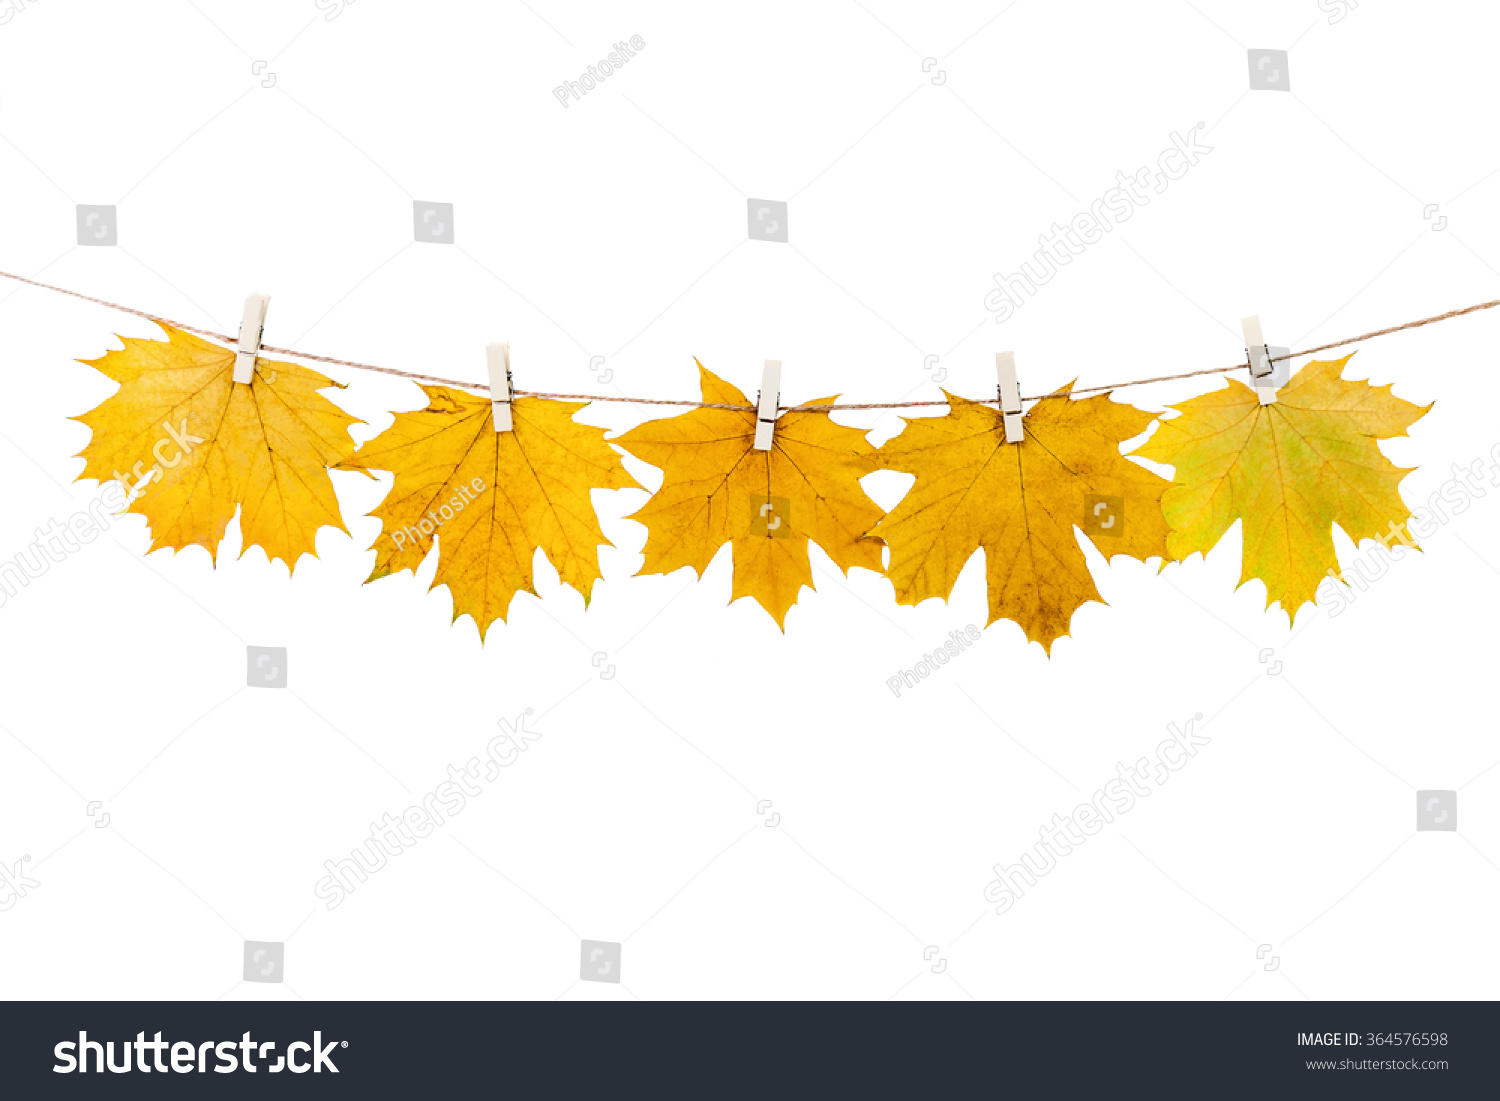 clothespins on the rope holding autumn leaves on a white background #364576598